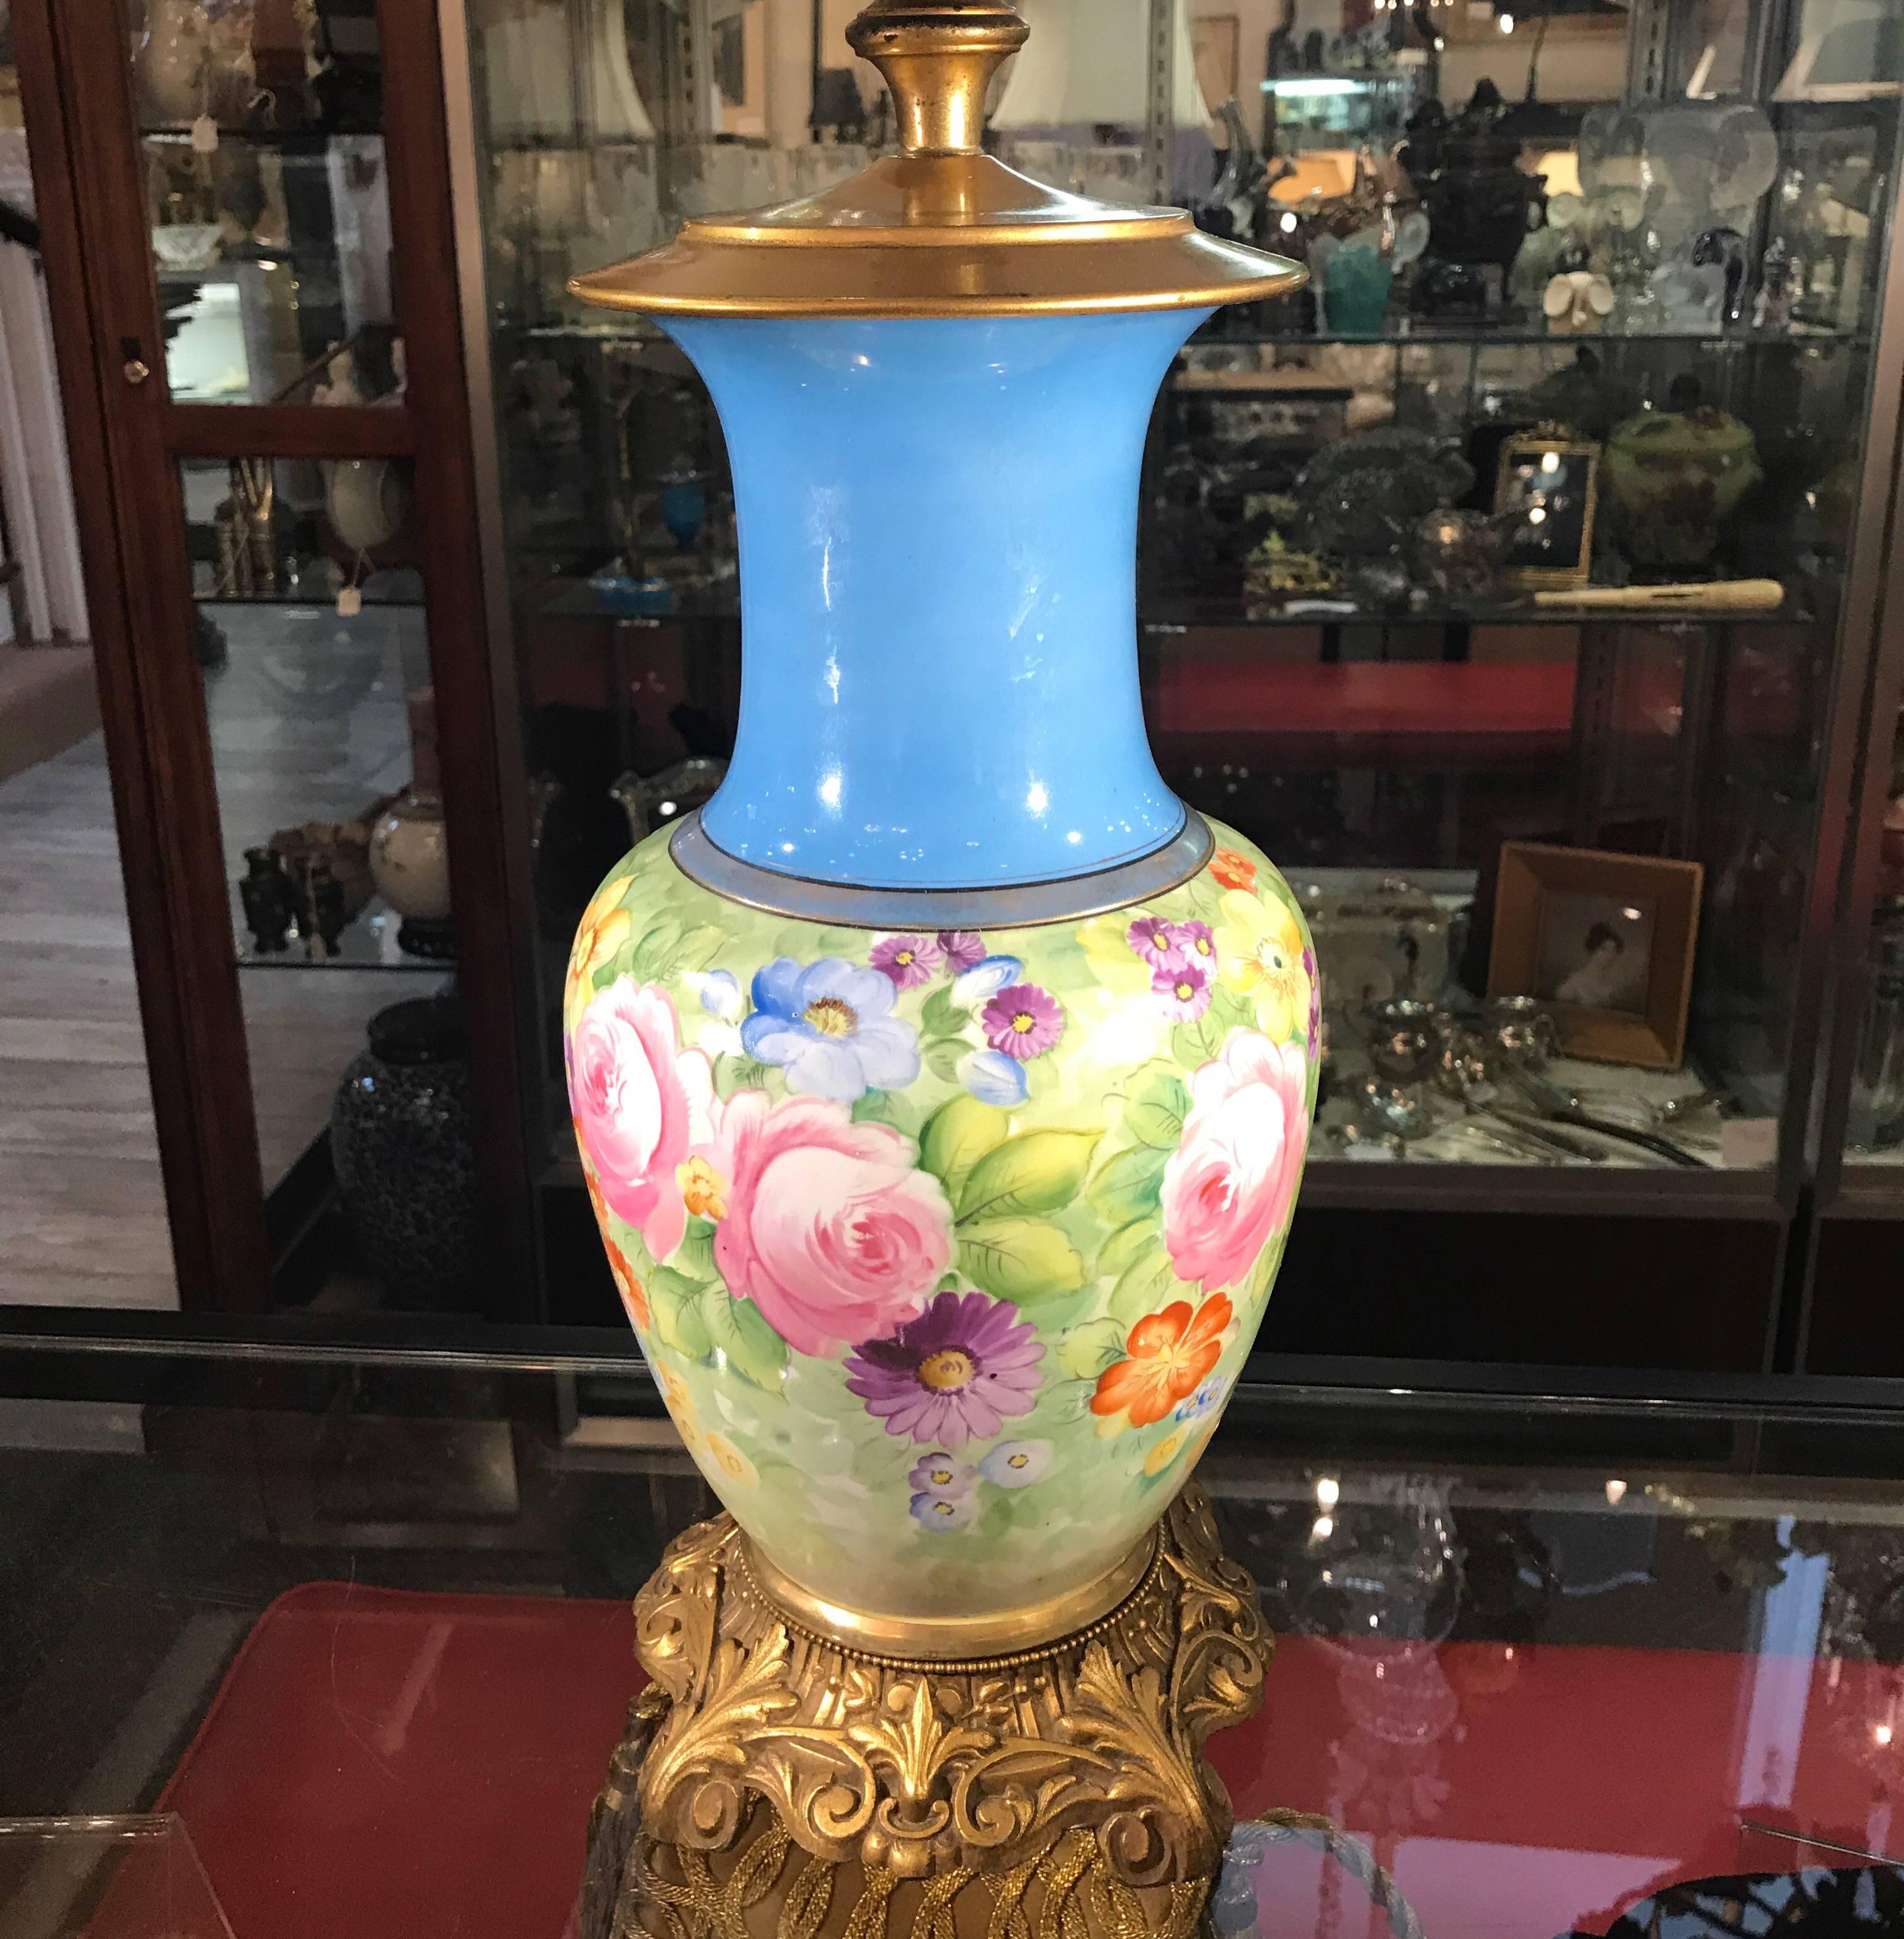 Vibrant hand-painted French porcelain floral vase lamp. The late 19th century vase electrified in the 1920s with a git metal base. The Celeste blue neck with floral body and gilt highlights. The shade is for Photographic purposes only and not